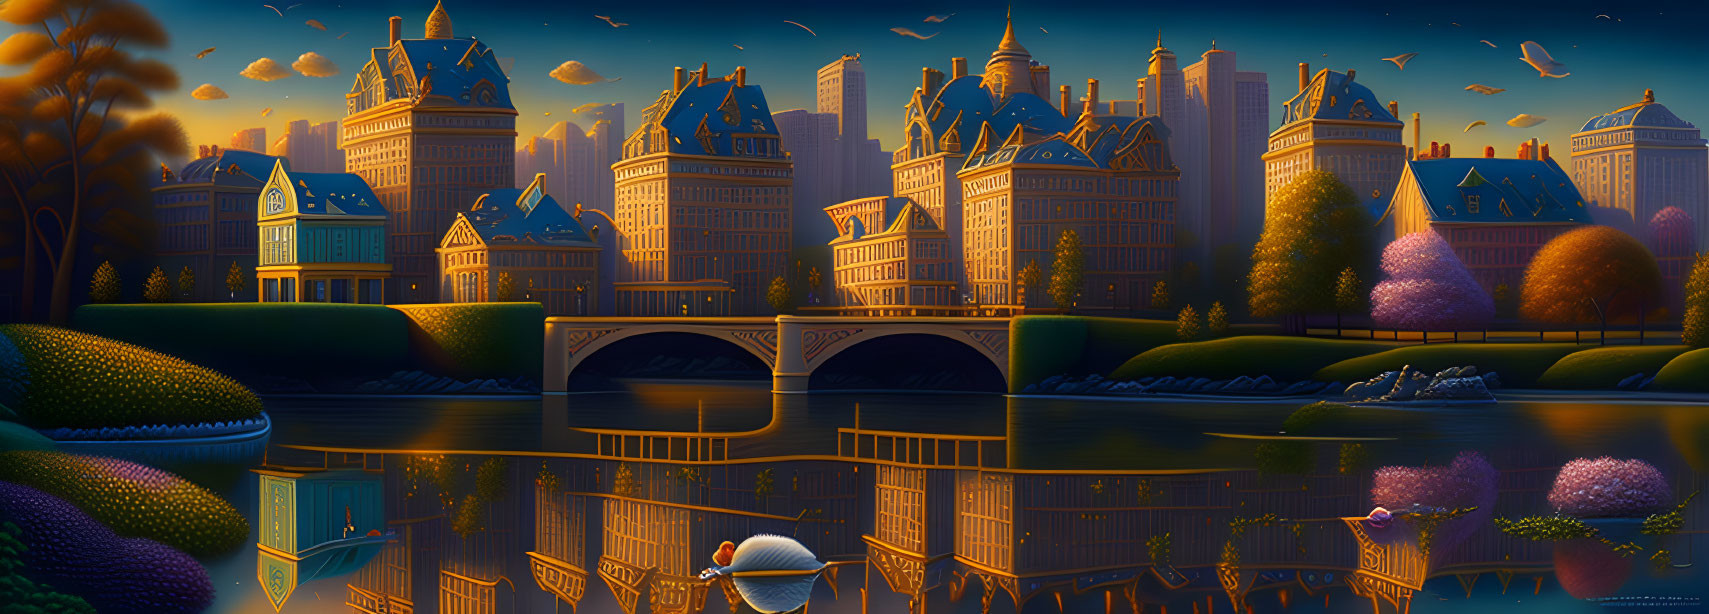 Fantastical cityscape at dusk with ornate buildings, arched bridge, river, swan